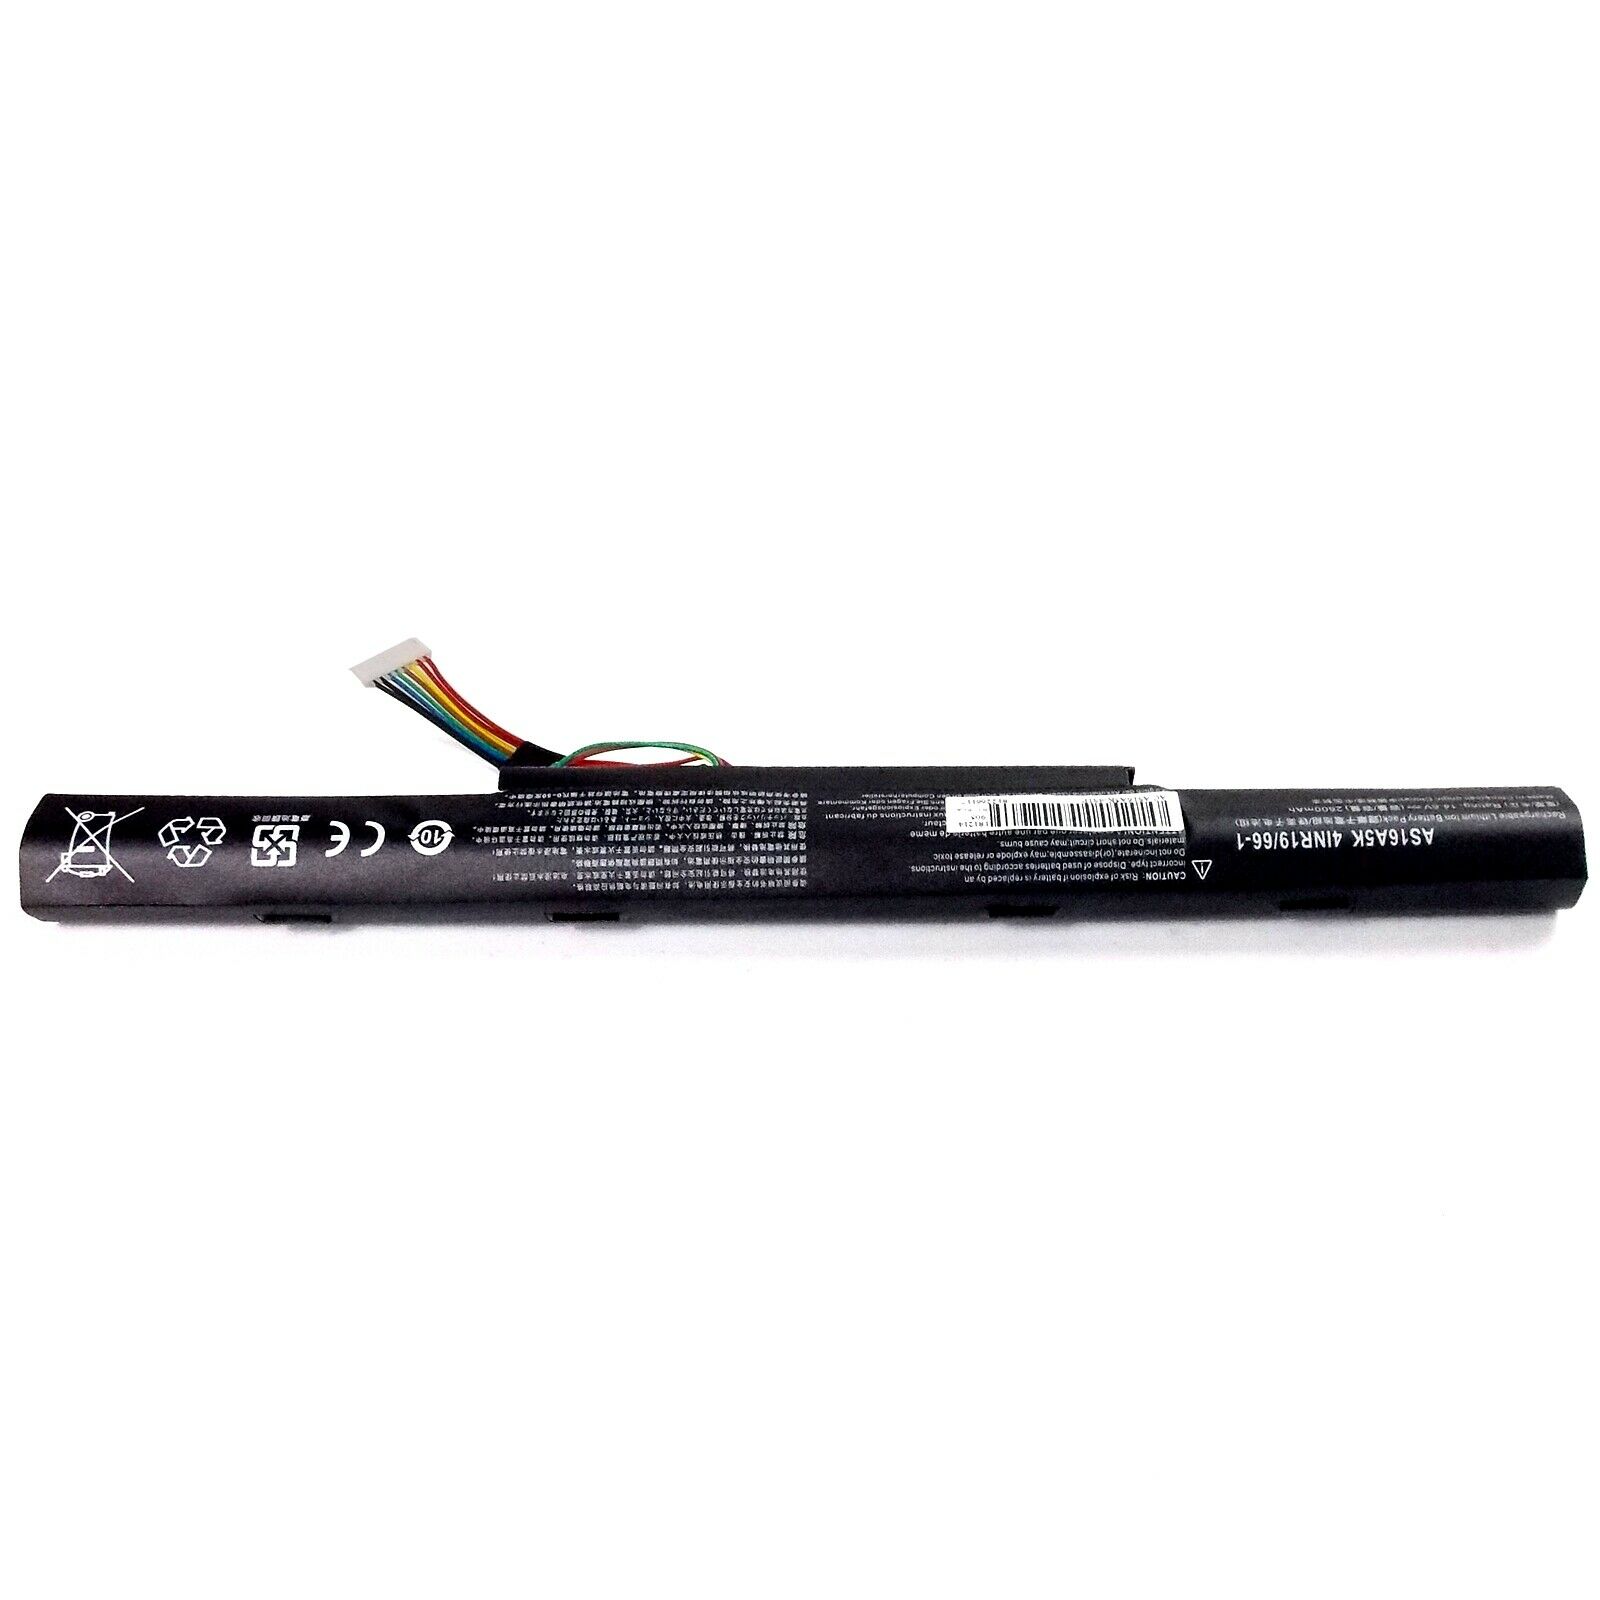 Batería para Acer Aspire E5-575G-56ED E5-575G-56GU E5-575G-56KS E5-575G-56WG(compatible)